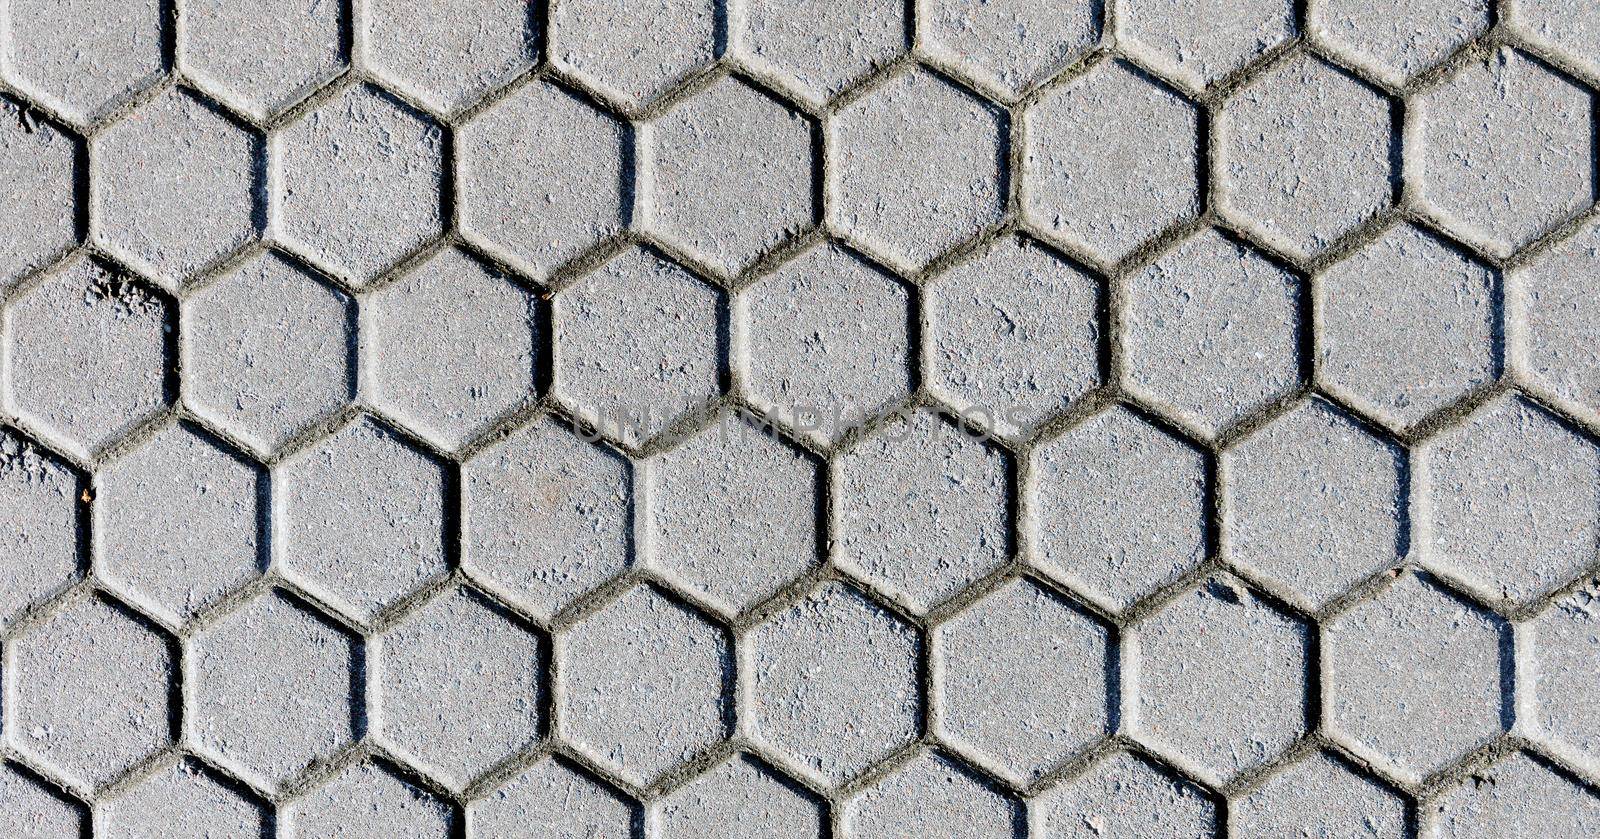 The black and white background image of hexagonal clay tiles